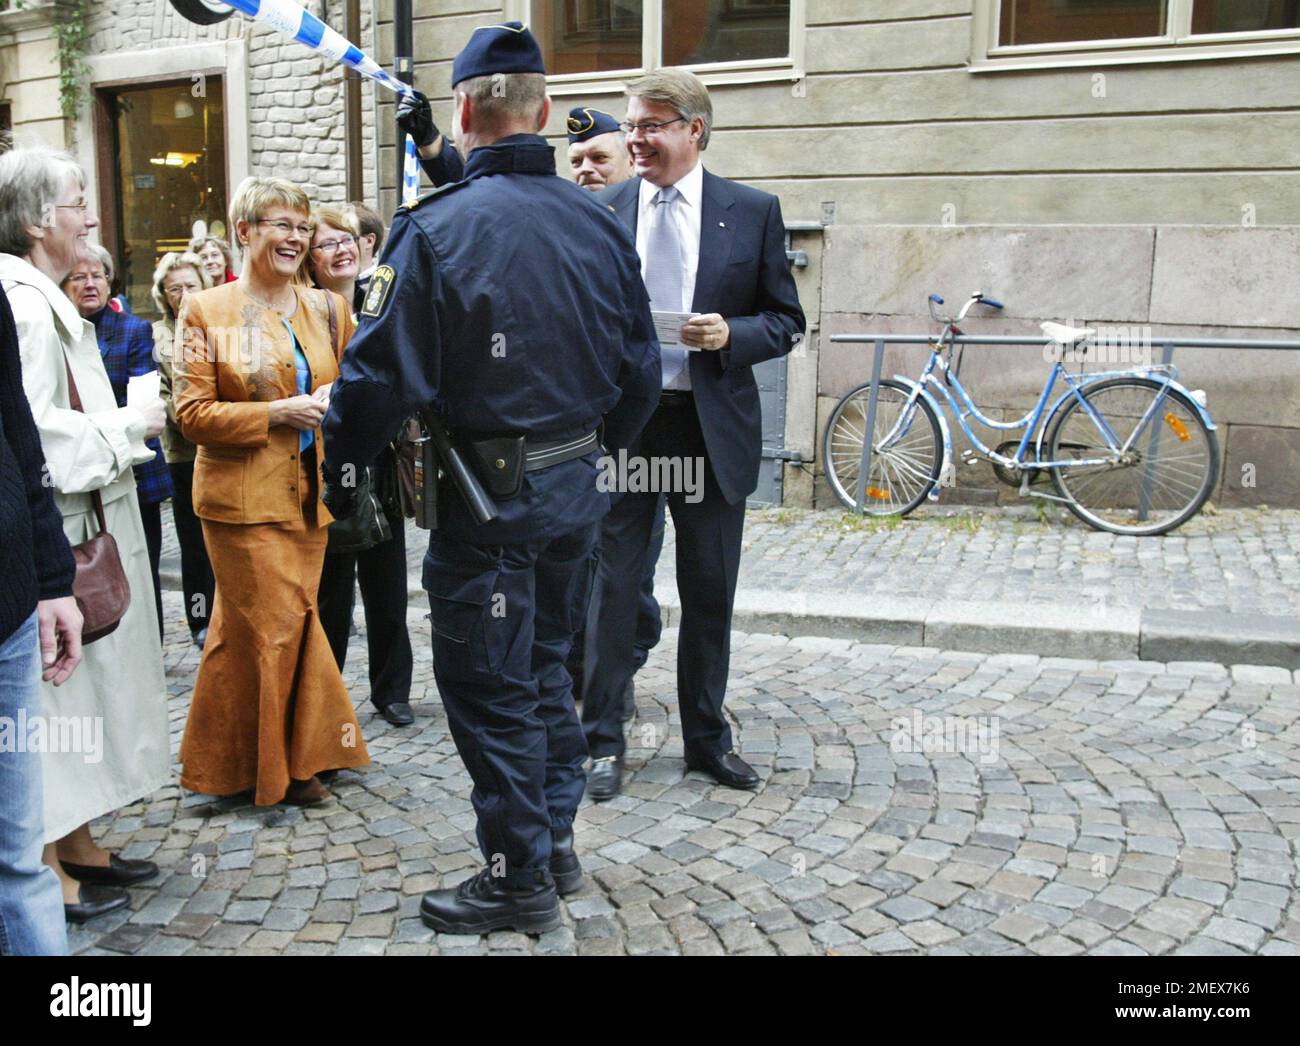 Maud Olofsson (The Centre Party) and Bo Lundgren (The Moderate Party) on their way to Parliament's opening, Riksmötet 2002, Stockholm, Sweden. Photo Jeppe Gustafsson Stock Photo